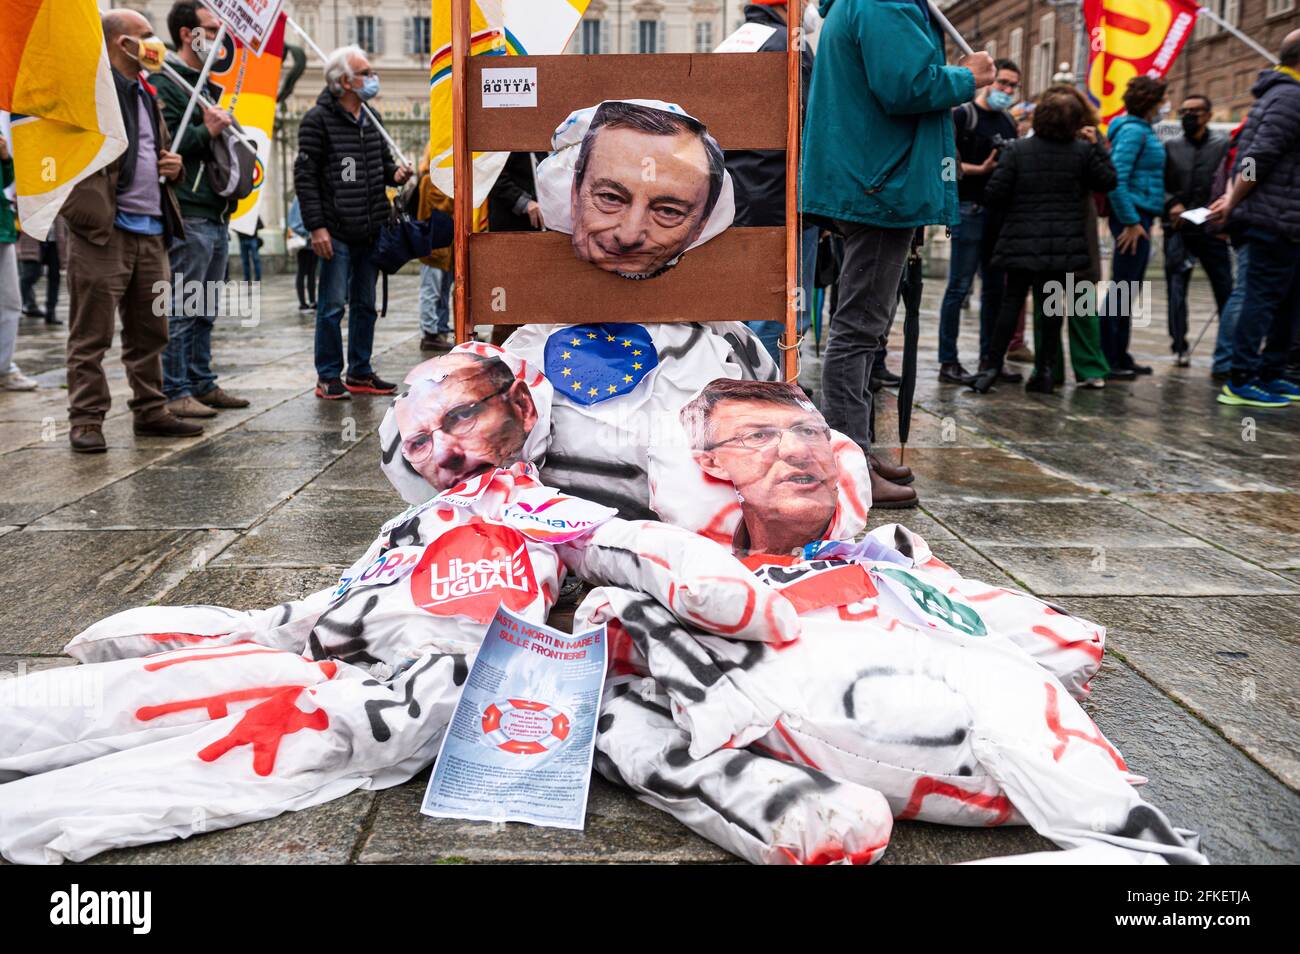 Turin, Italy. 01 May 2021. Puppets depicting Mario Draghi, Enrico Letta and Maurizio Landini are guillotined during a May Day rally (also known as International Workers' Day or Labour Day). May Day occurs every year on 1 May and it is used to mark the fight for workers' rights across the world . Credit: Nicolò Campo/Alamy Live News Stock Photo